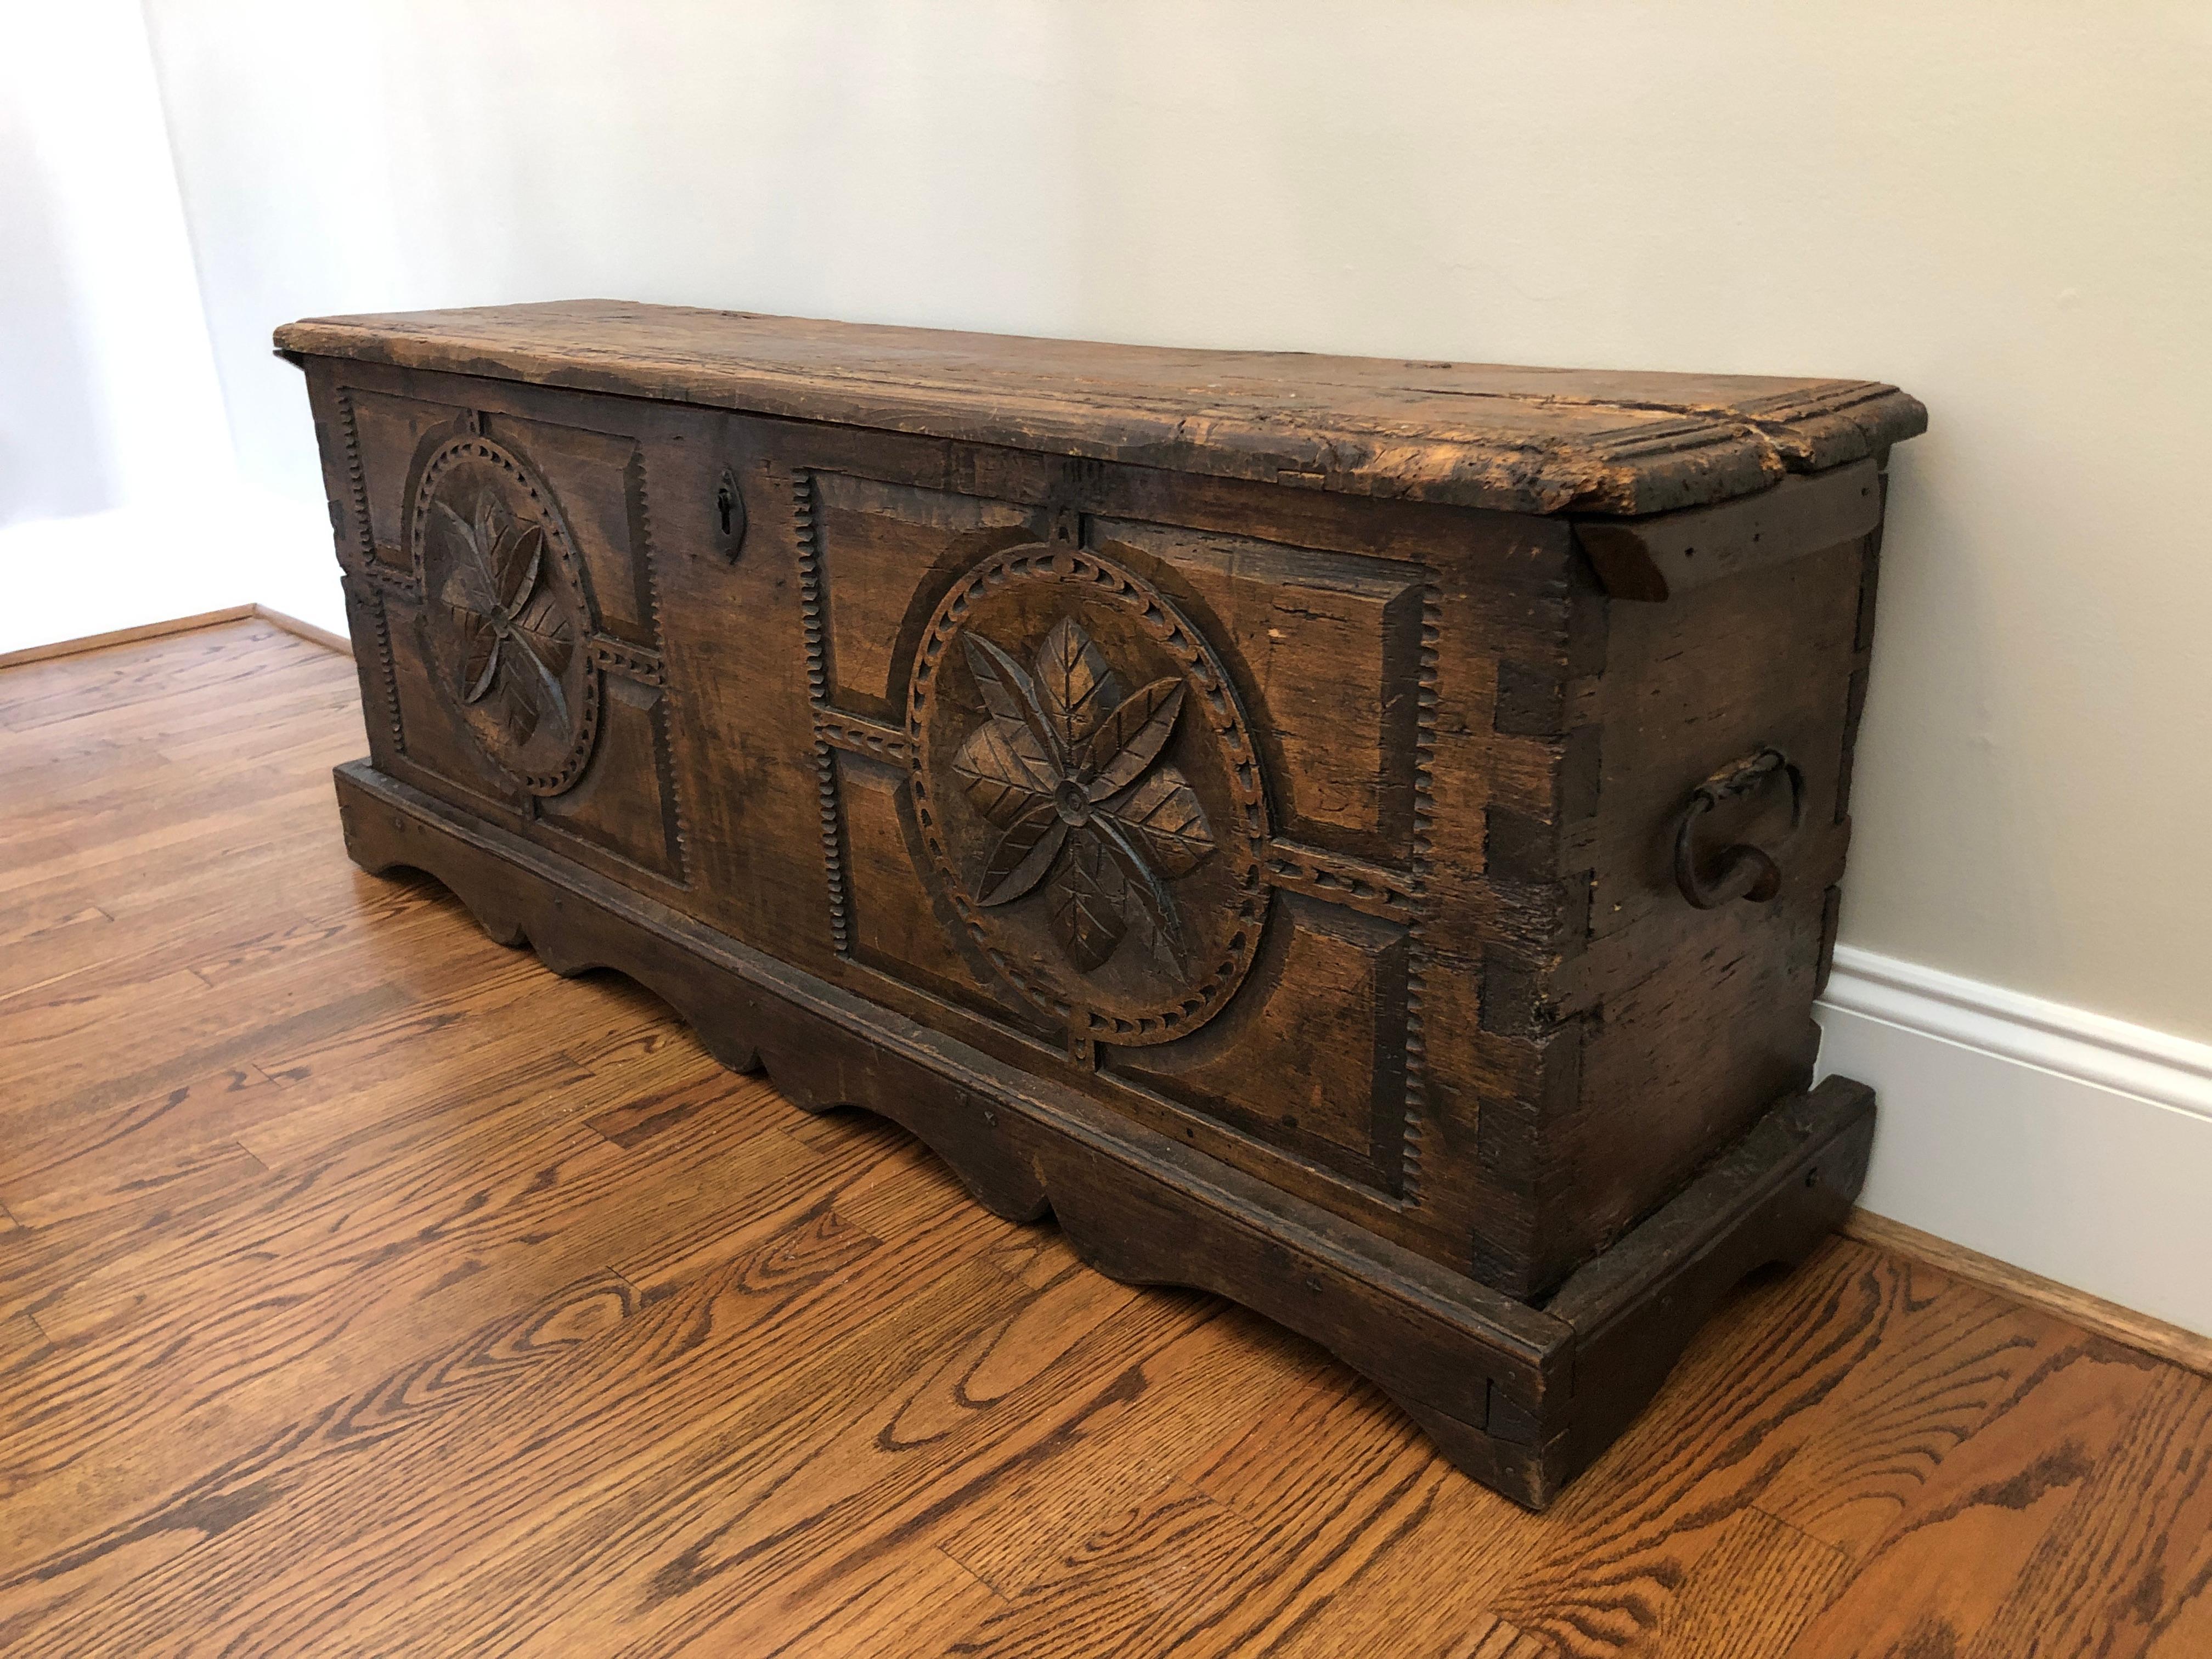 A coffer originating in Belgium in the 16th Century. This trunk was recovered from the ruins of a medieval Belgian monastery in the 1990s by its current owner. 

Measures: 54W 13.75D 21H

Good original condition. Has been treated for insects.
 